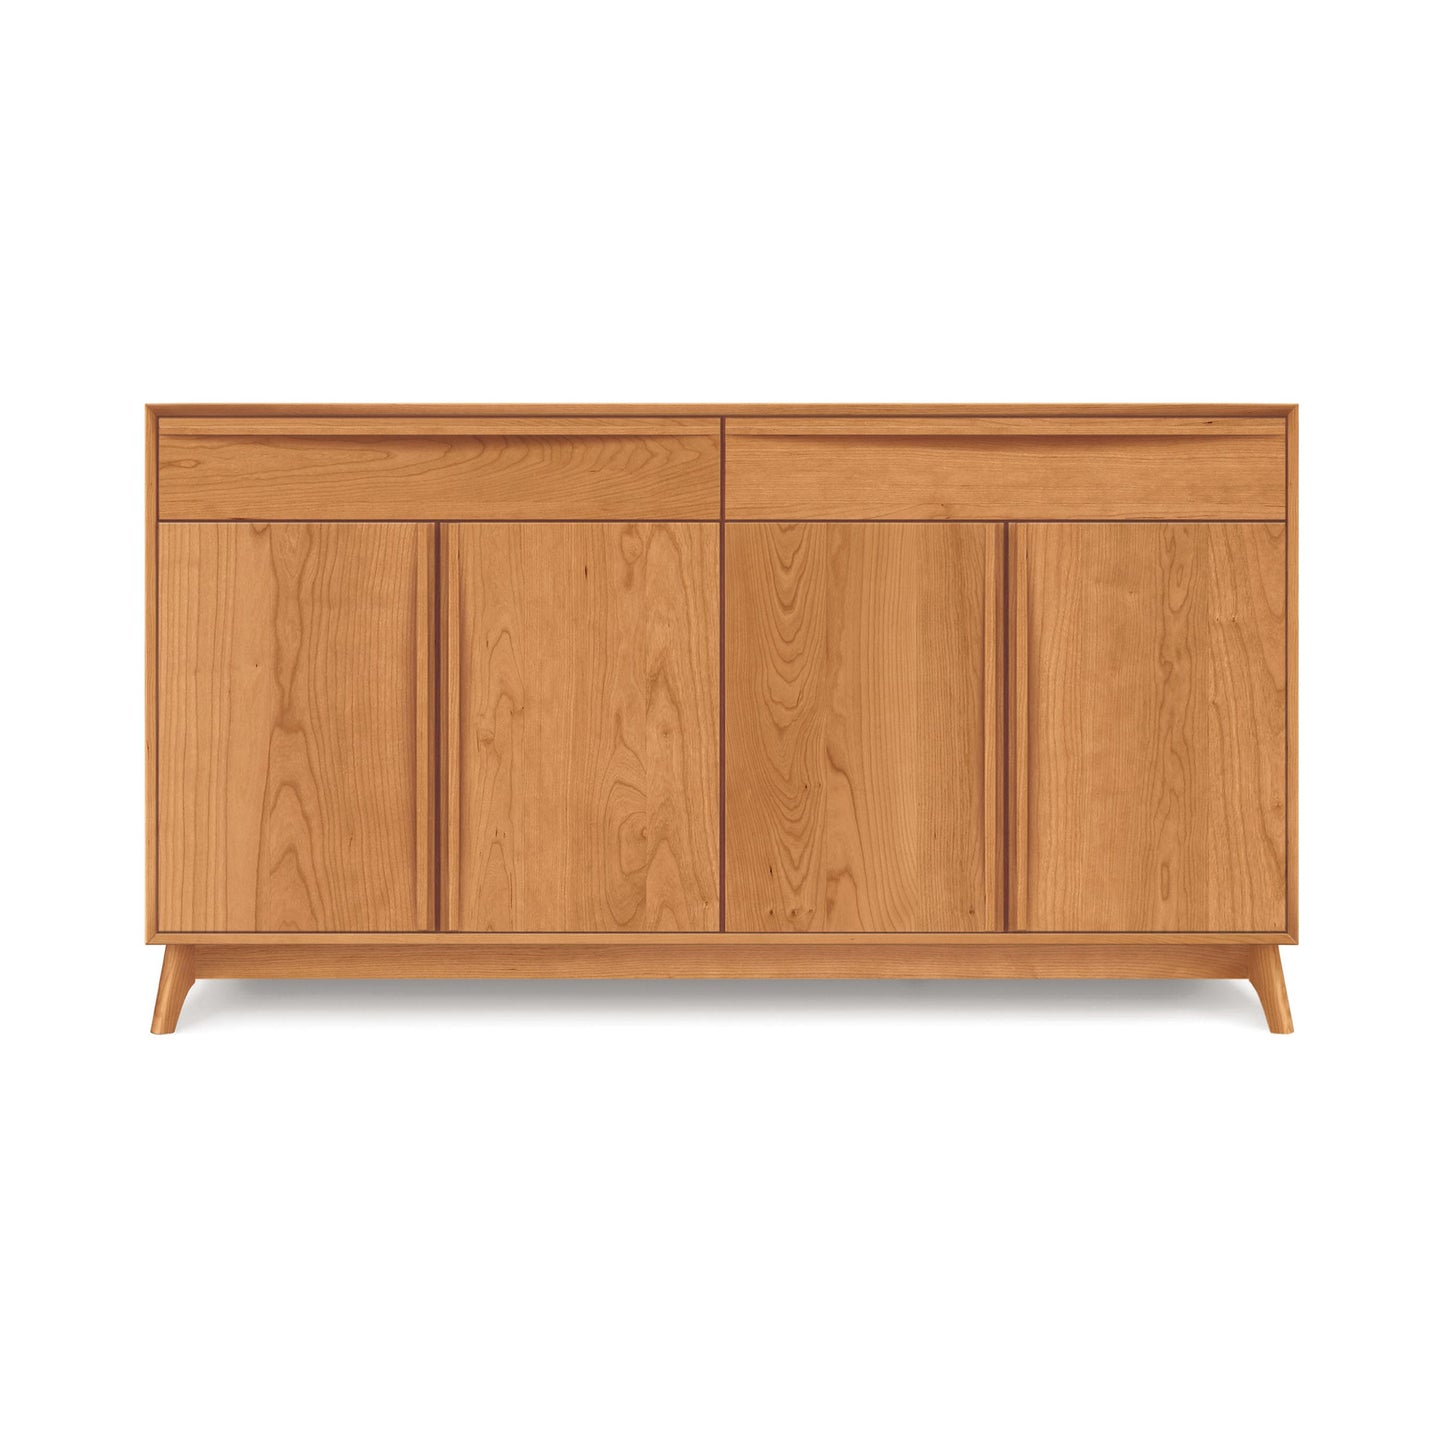 A handcrafted, solid wood Copeland Furniture Catalina 2-Drawers, 4-Door Buffet sideboard with closed doors on a white background.